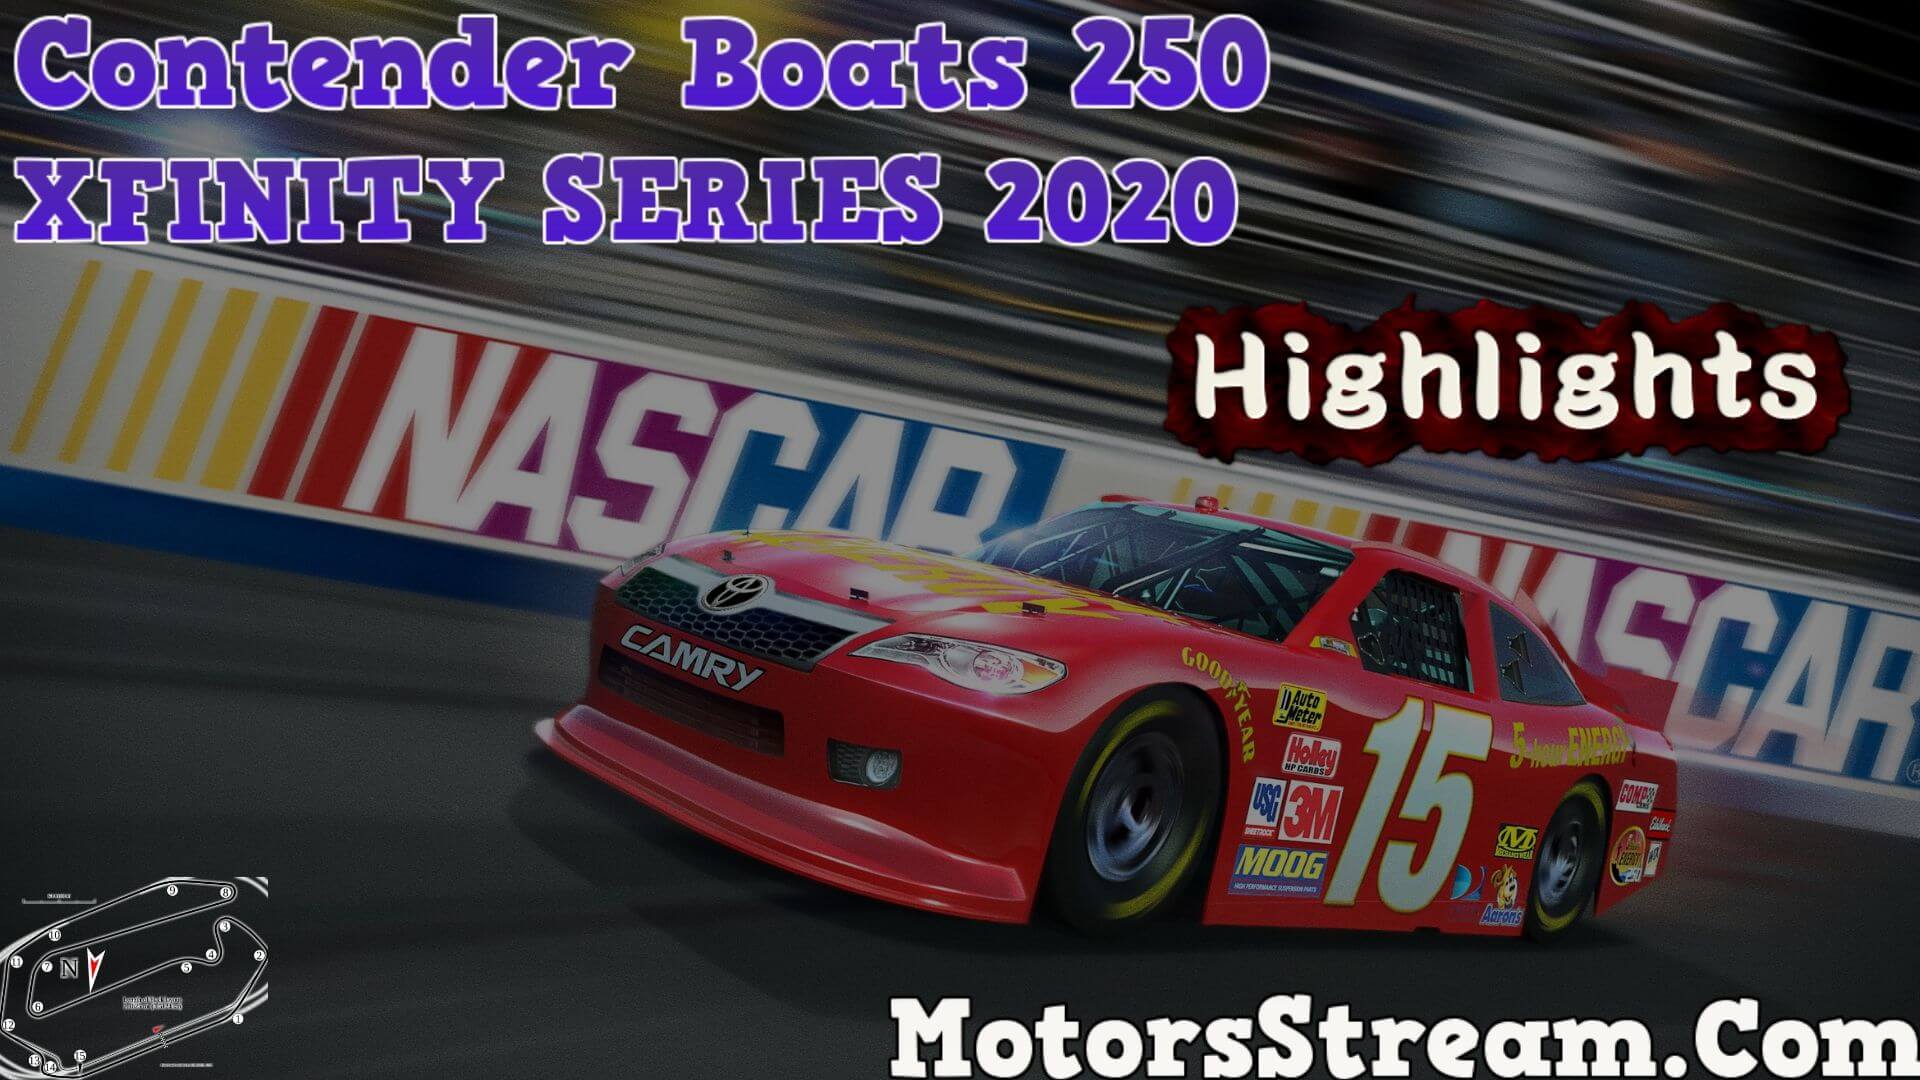 Contender Boats 250 Highlights 2020 Xfinity Series